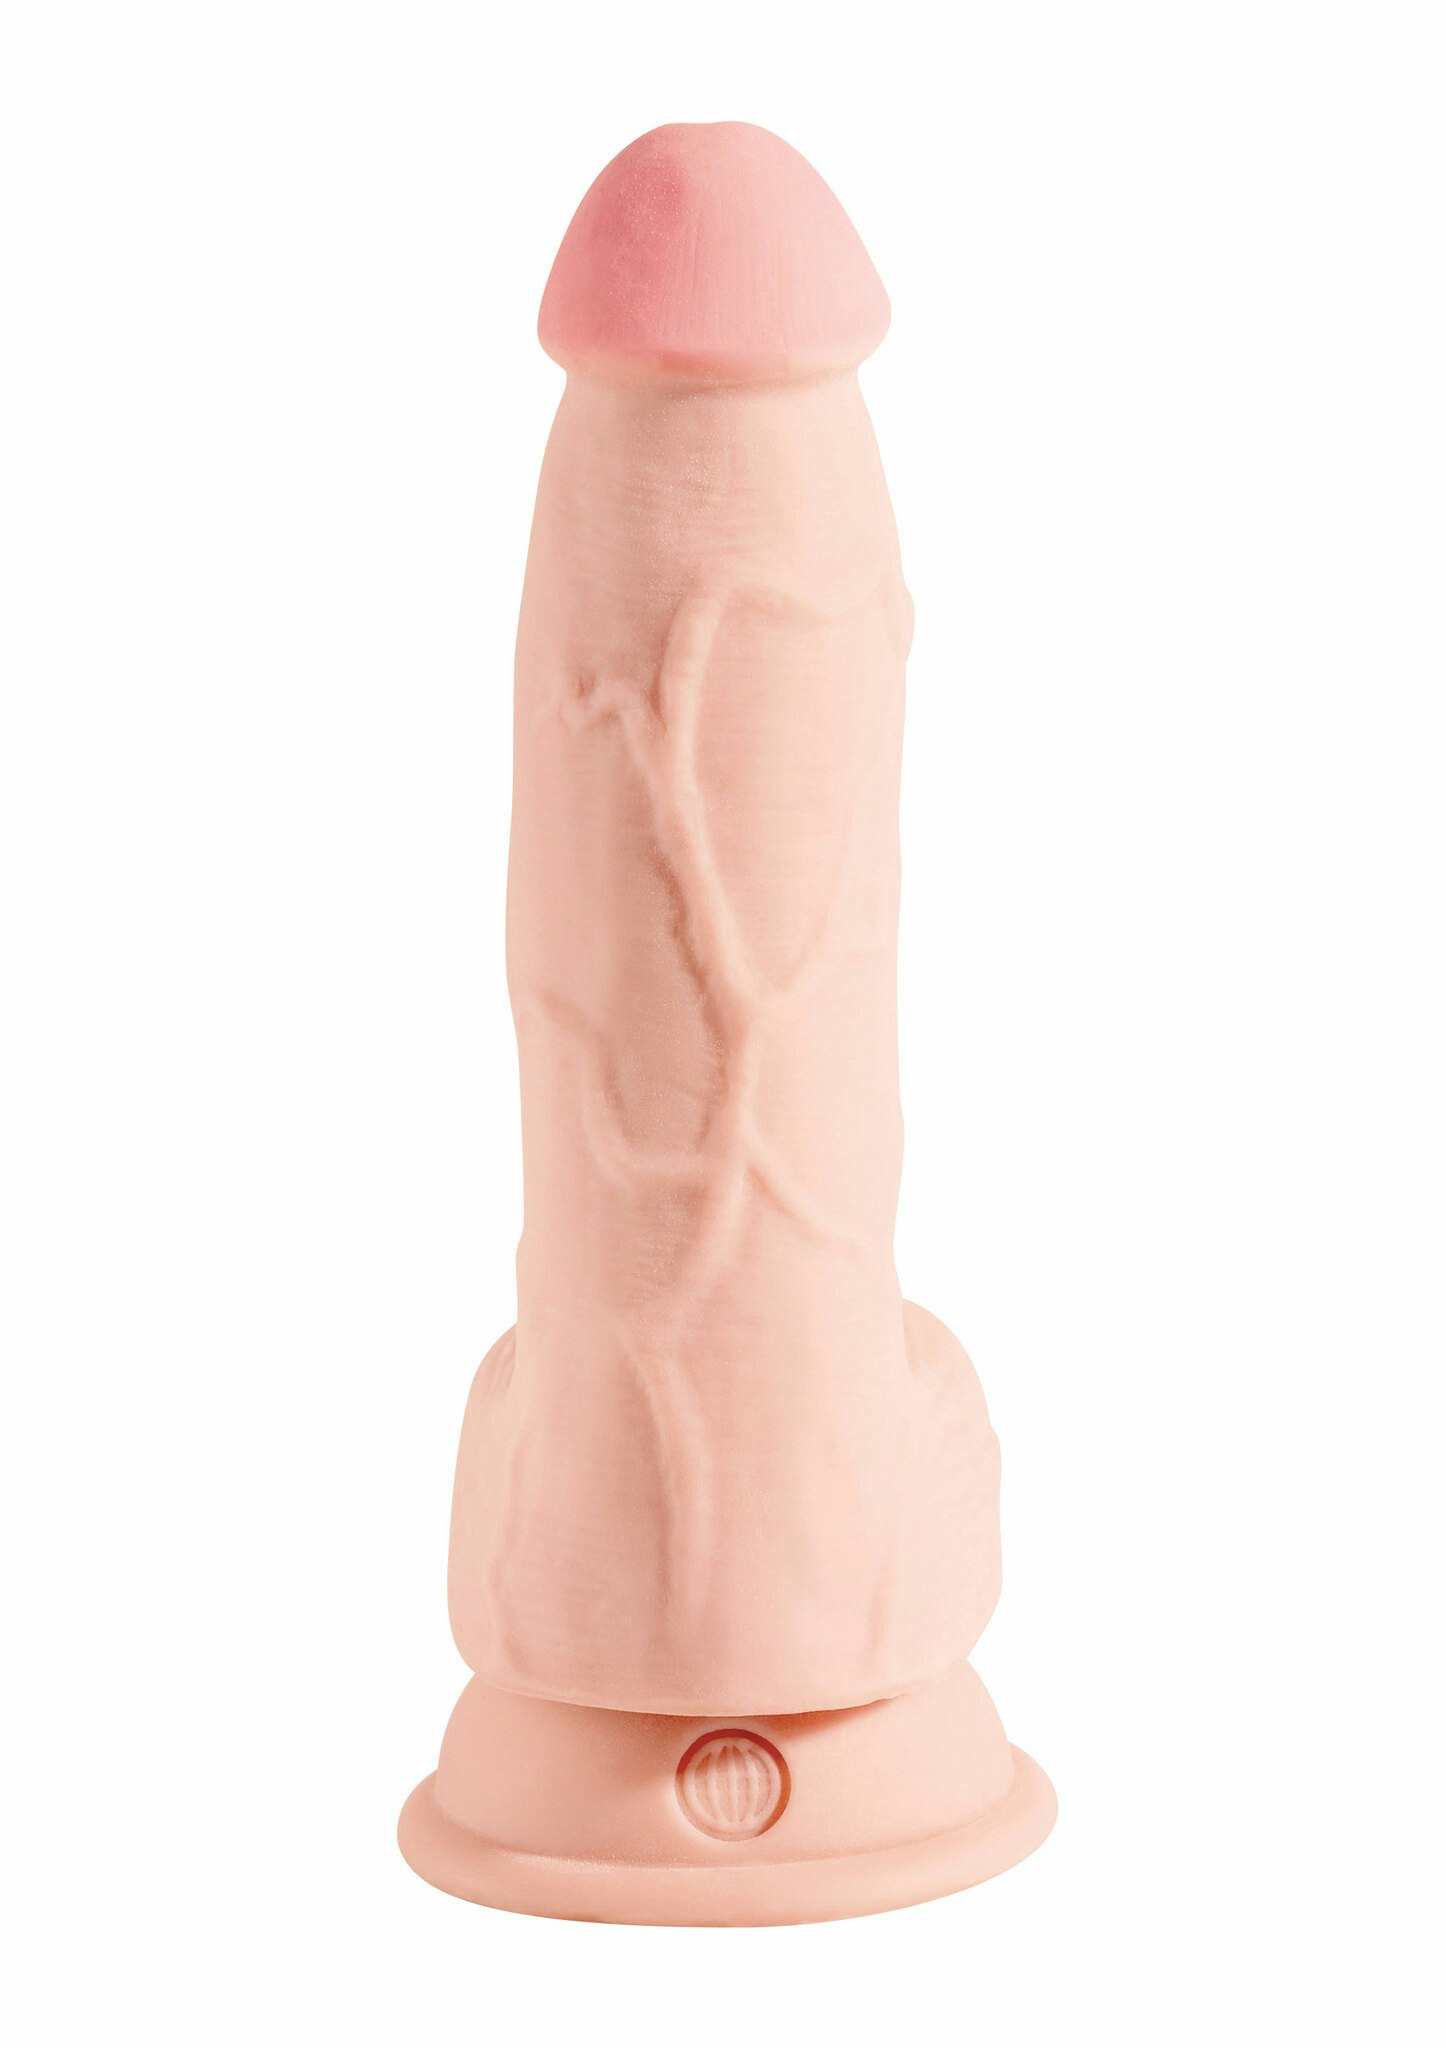 King Cock - 3D Triple Density Cock with Balls 5 inch